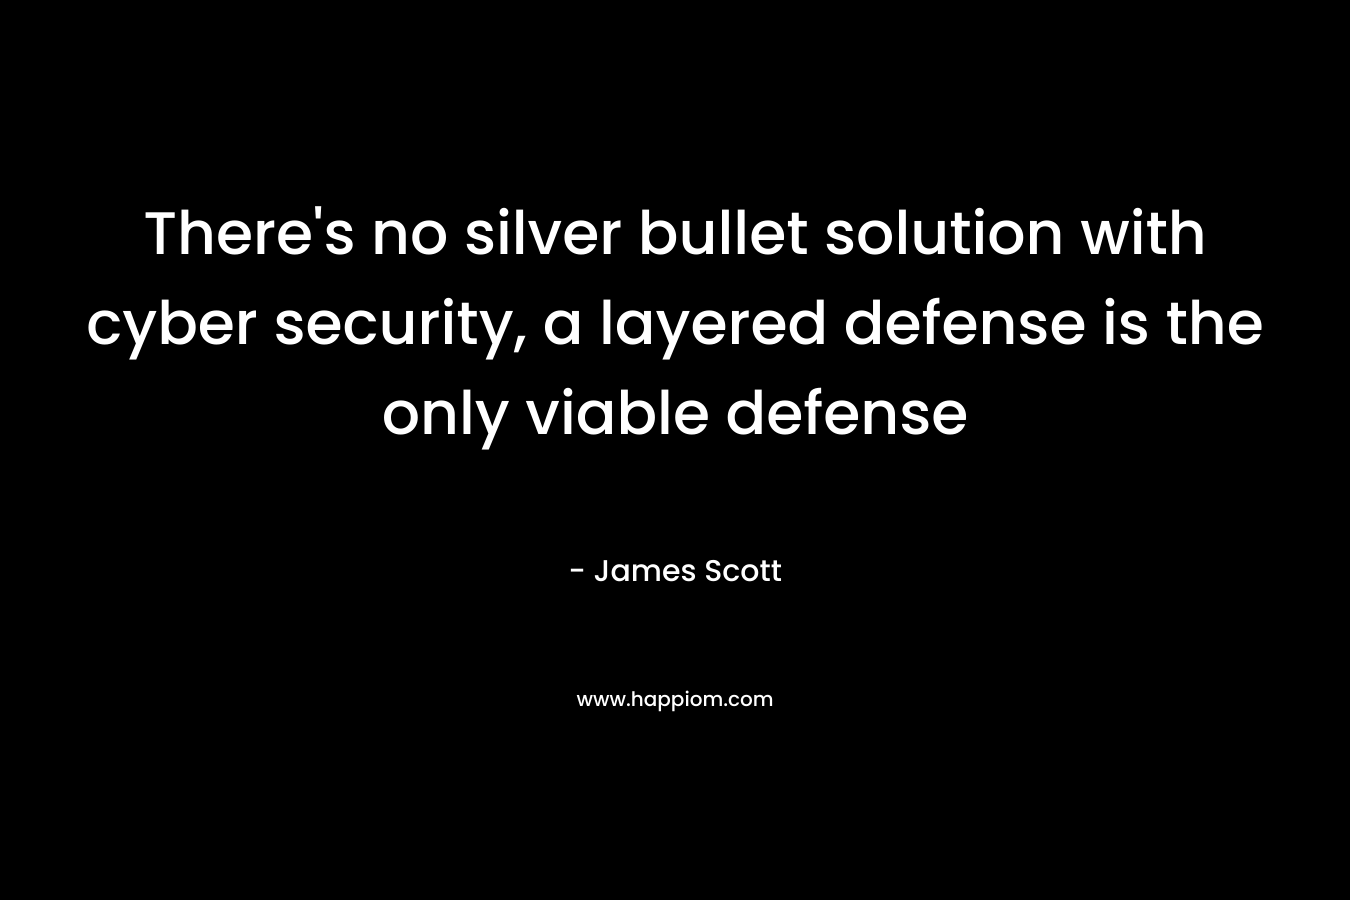 There’s no silver bullet solution with cyber security, a layered defense is the only viable defense – James Scott